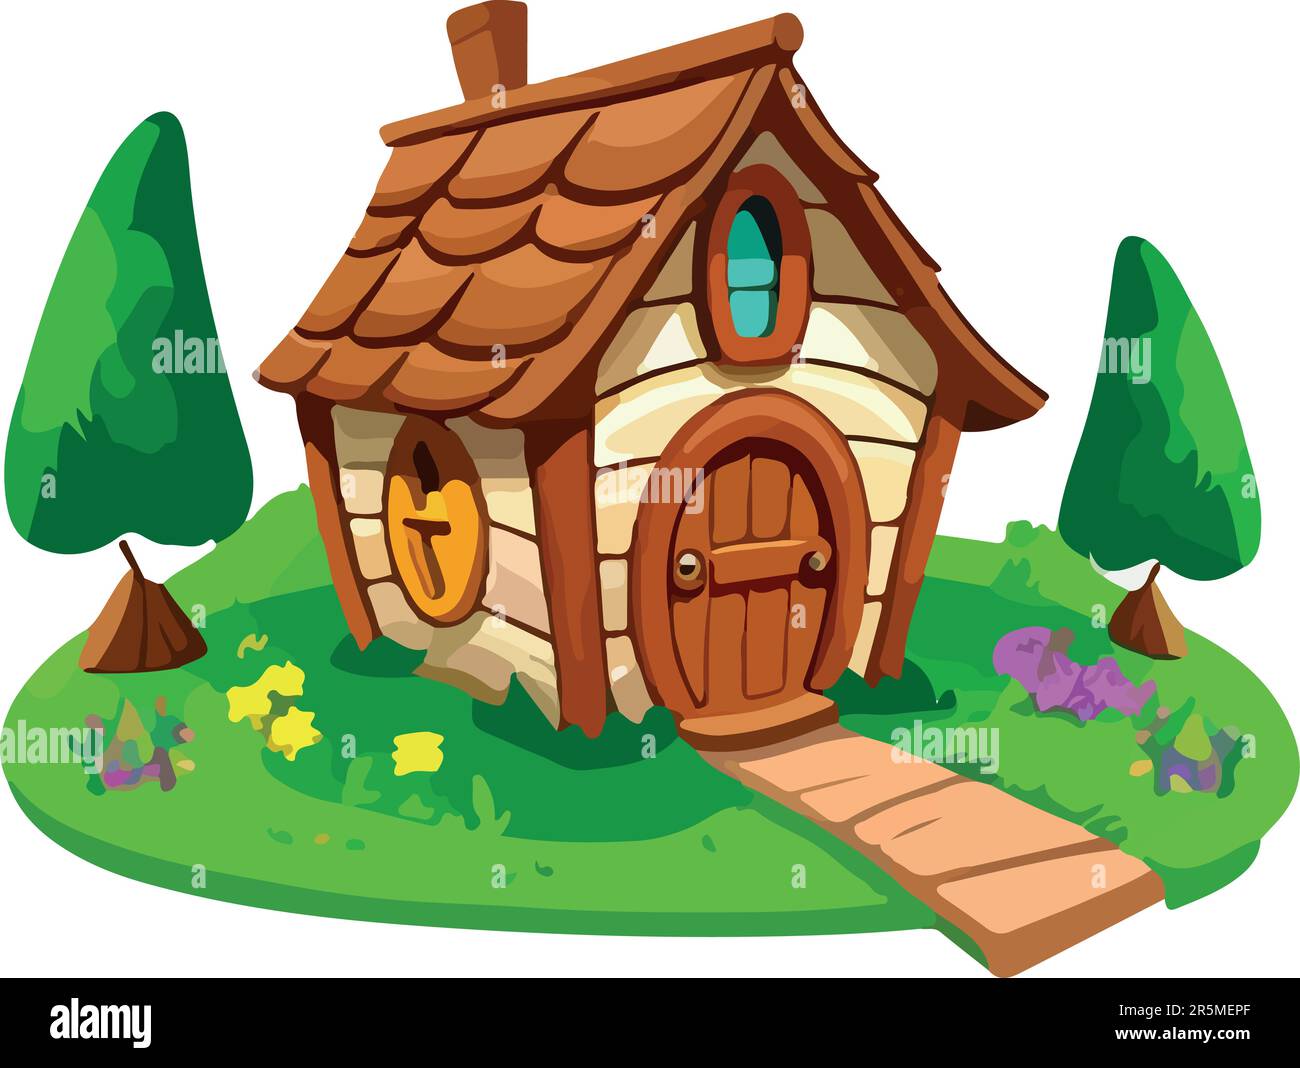 Pretty and cuteness dwarf and hobbit house Stock Vector